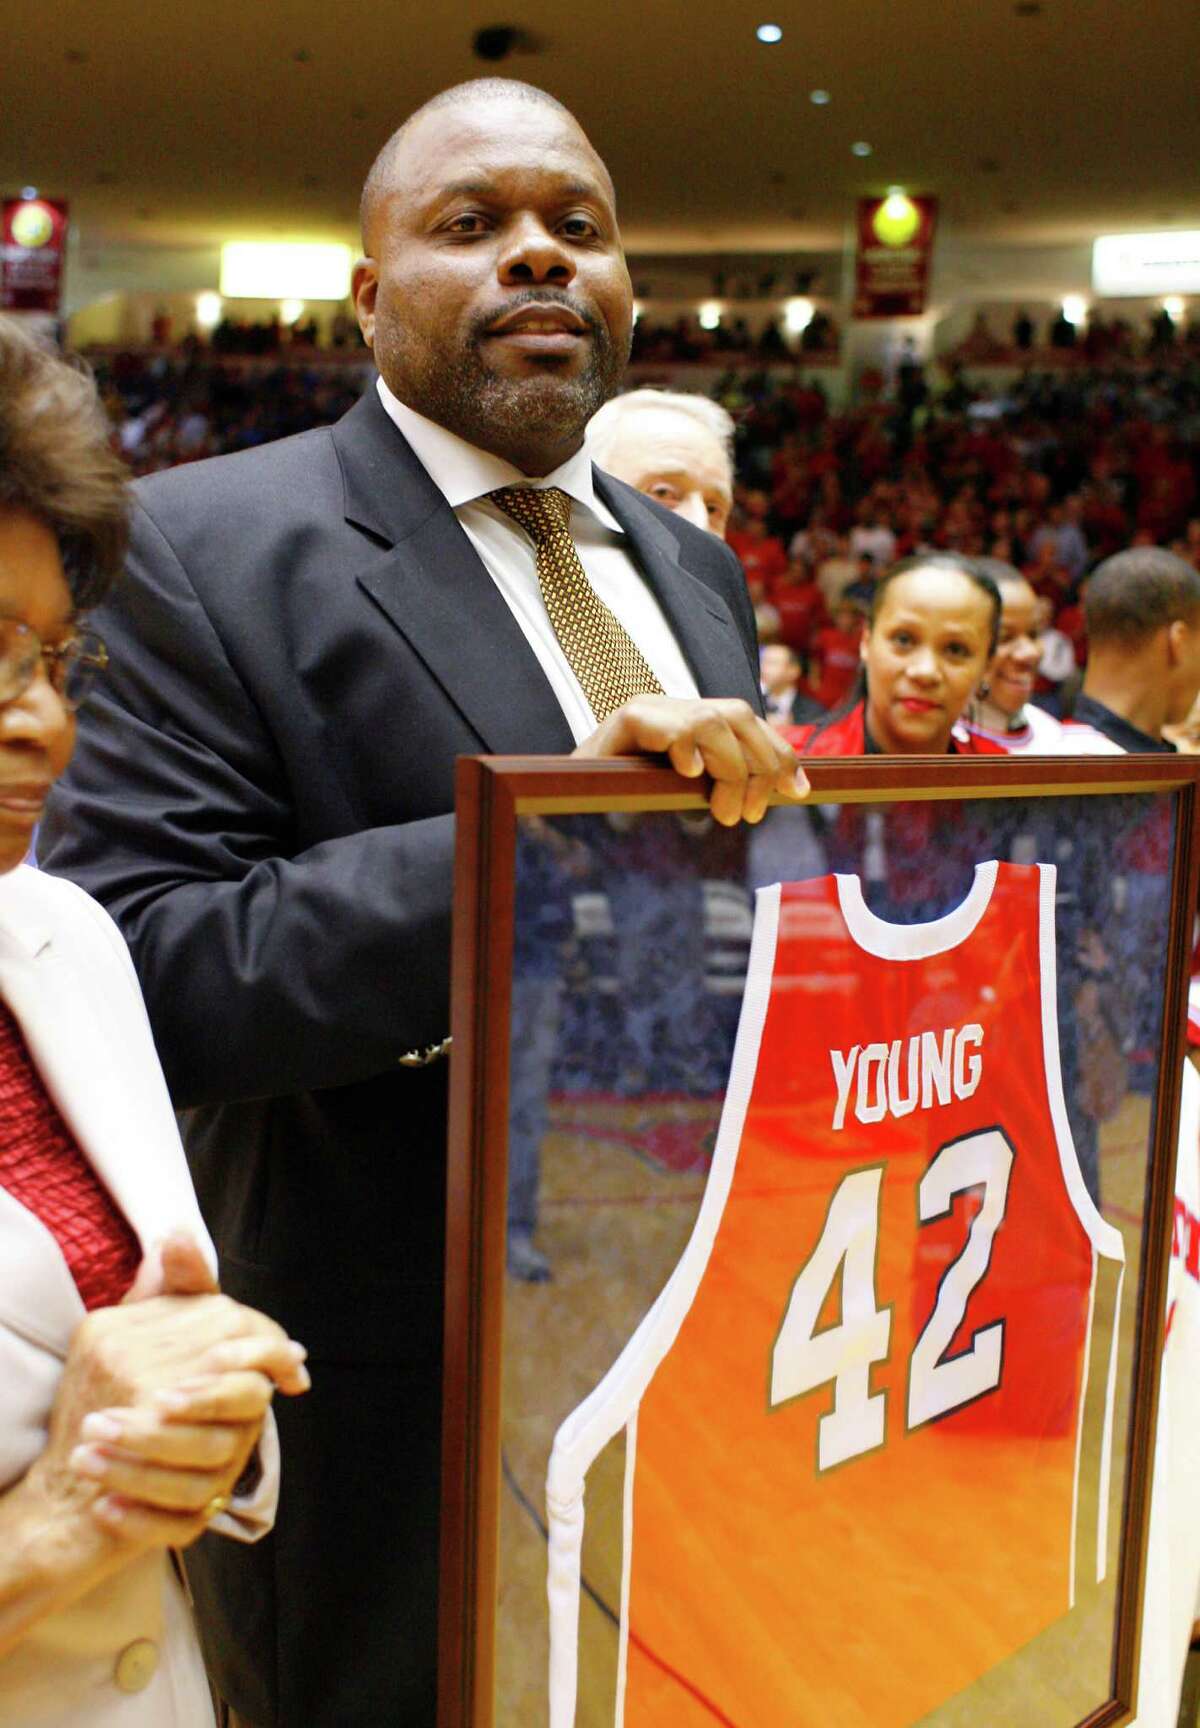 Michael Young holds his framed jersey after his number was retired during half-time of the University of Houston v Kentucky basketball game, Tuesday, at Hofheinz Arena. Tuesday, Dec. 18, 2007, in Houston. (Steve Ueckert / Chronicle)